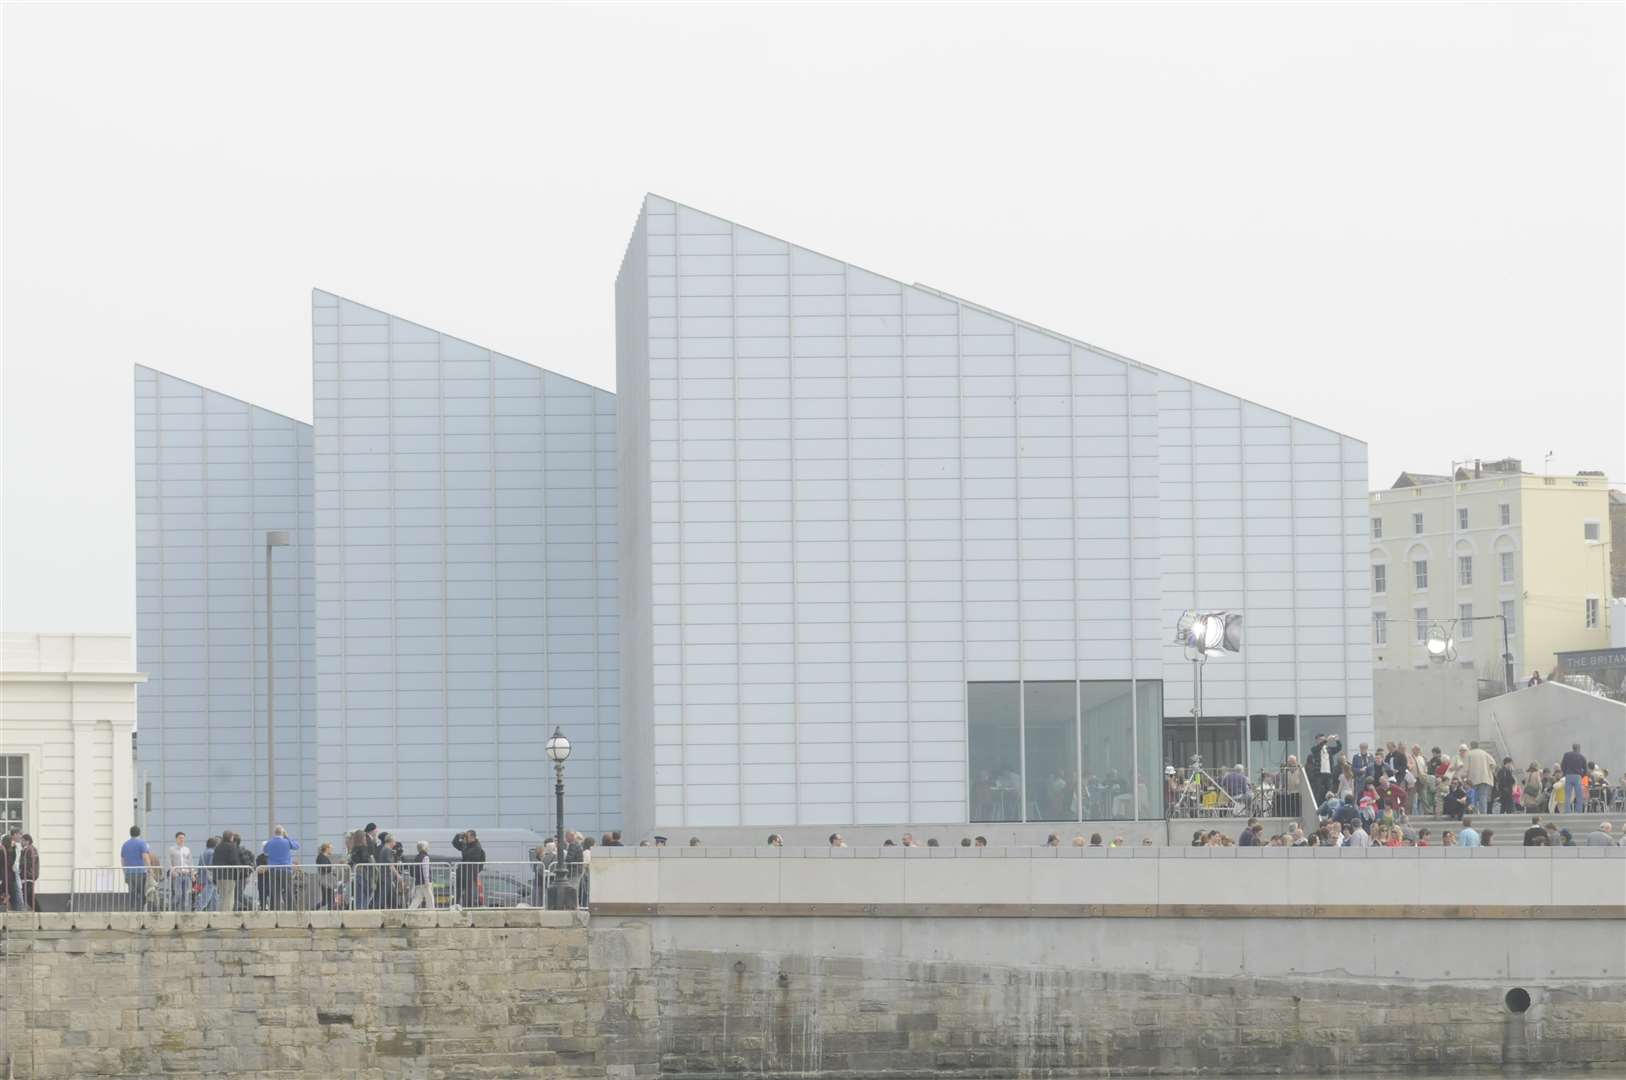 The Turner Contemporary Gallery